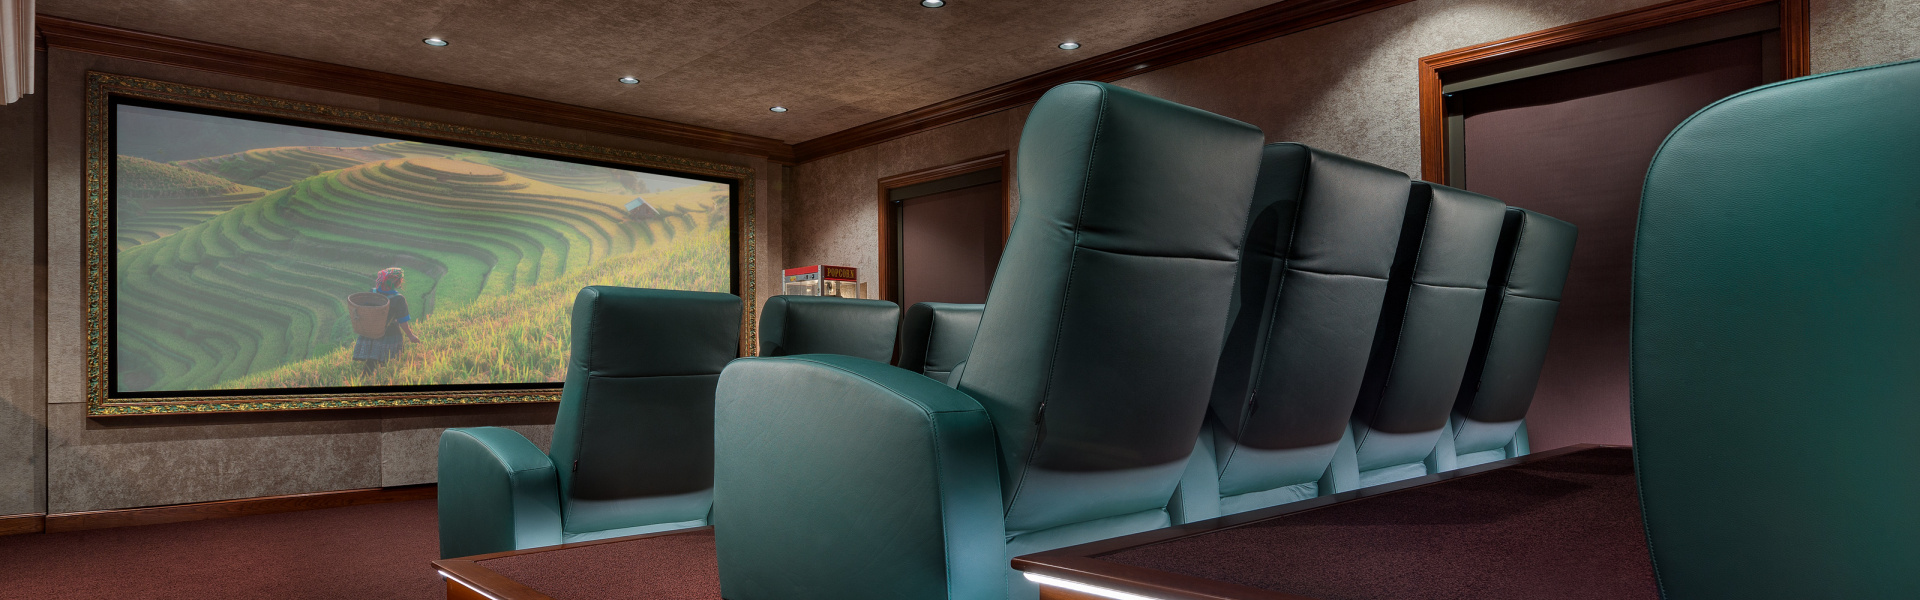 Smart home installation by Beyond Home Theater for Malibu